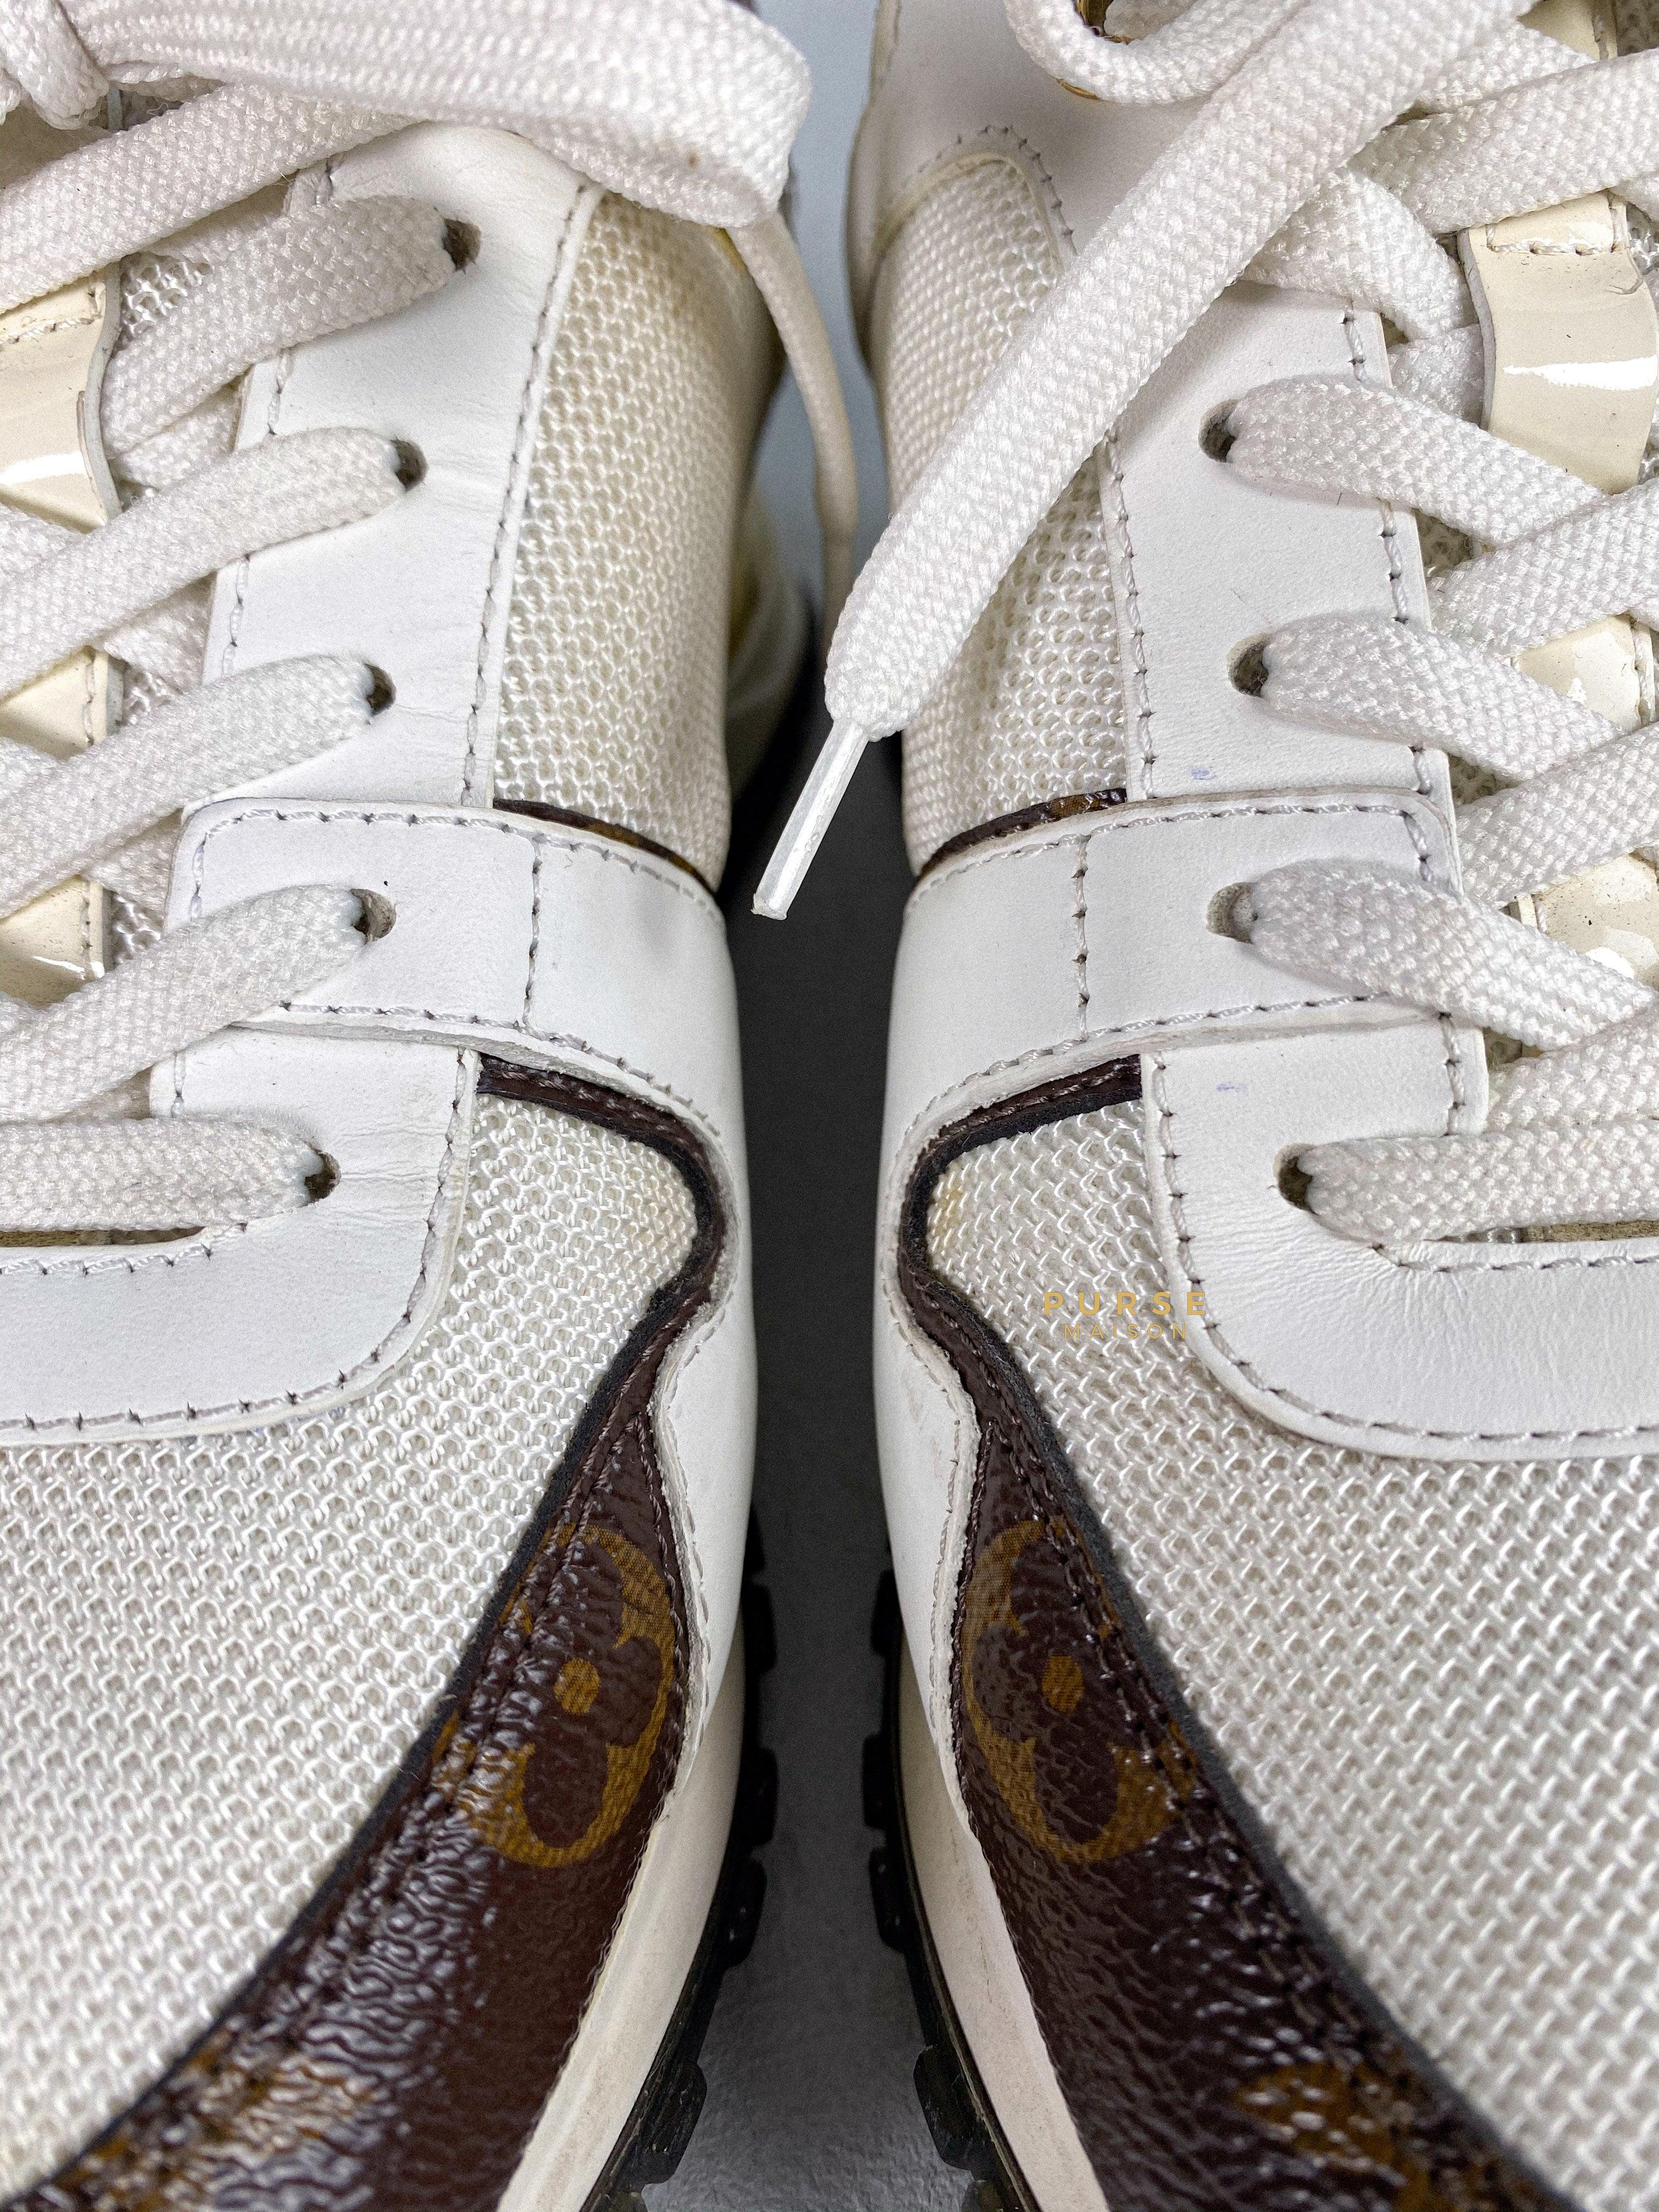 Louis Vuitton White Mesh and Leather Run Away Lace Up Sneakers Size 37 (25cm) | Purse Maison Luxury Bags Shop